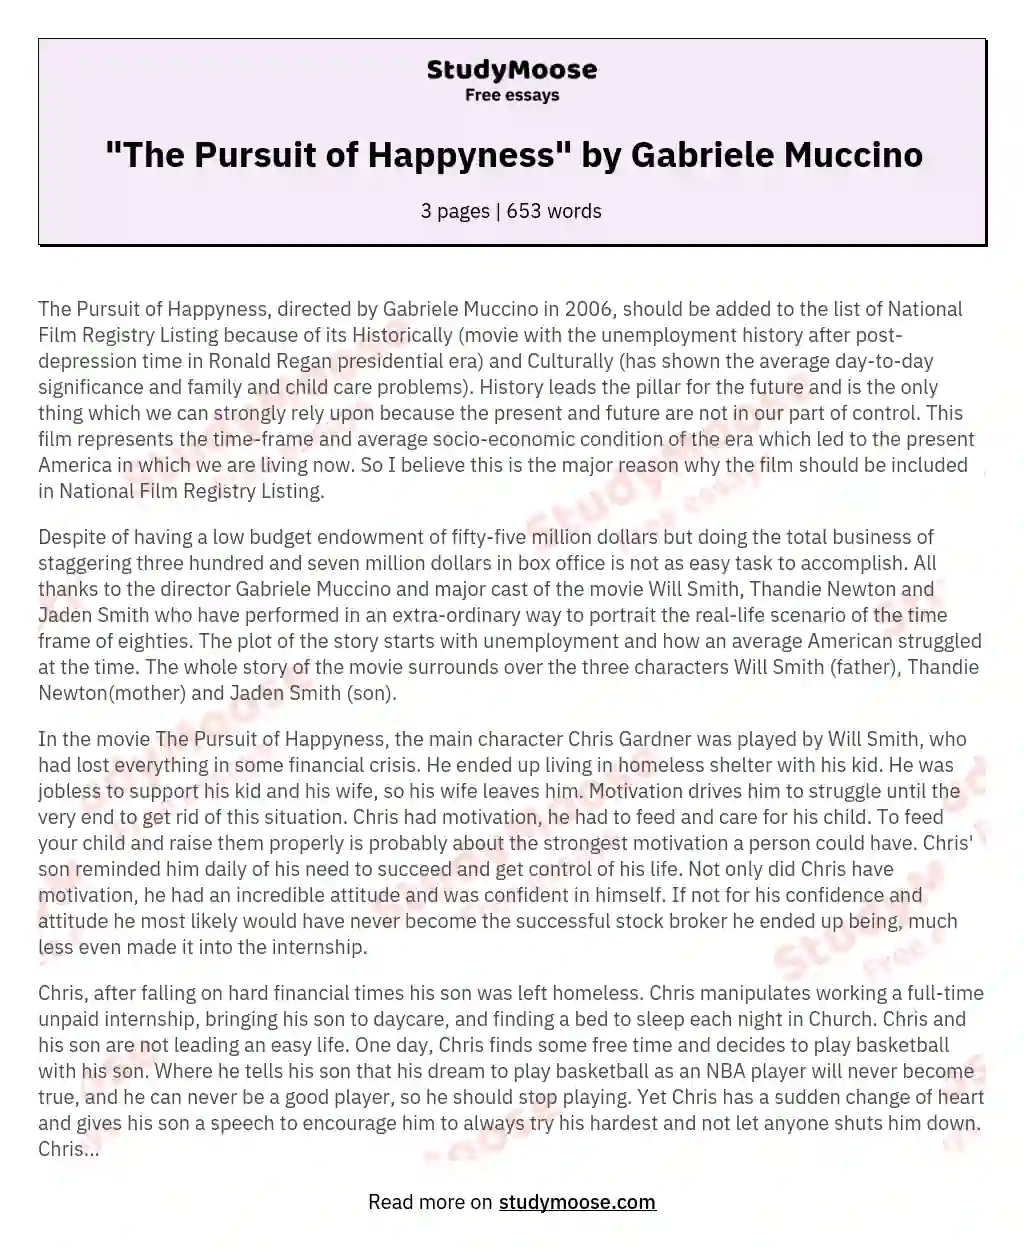 "The Pursuit of Happyness" by Gabriele Muccino essay